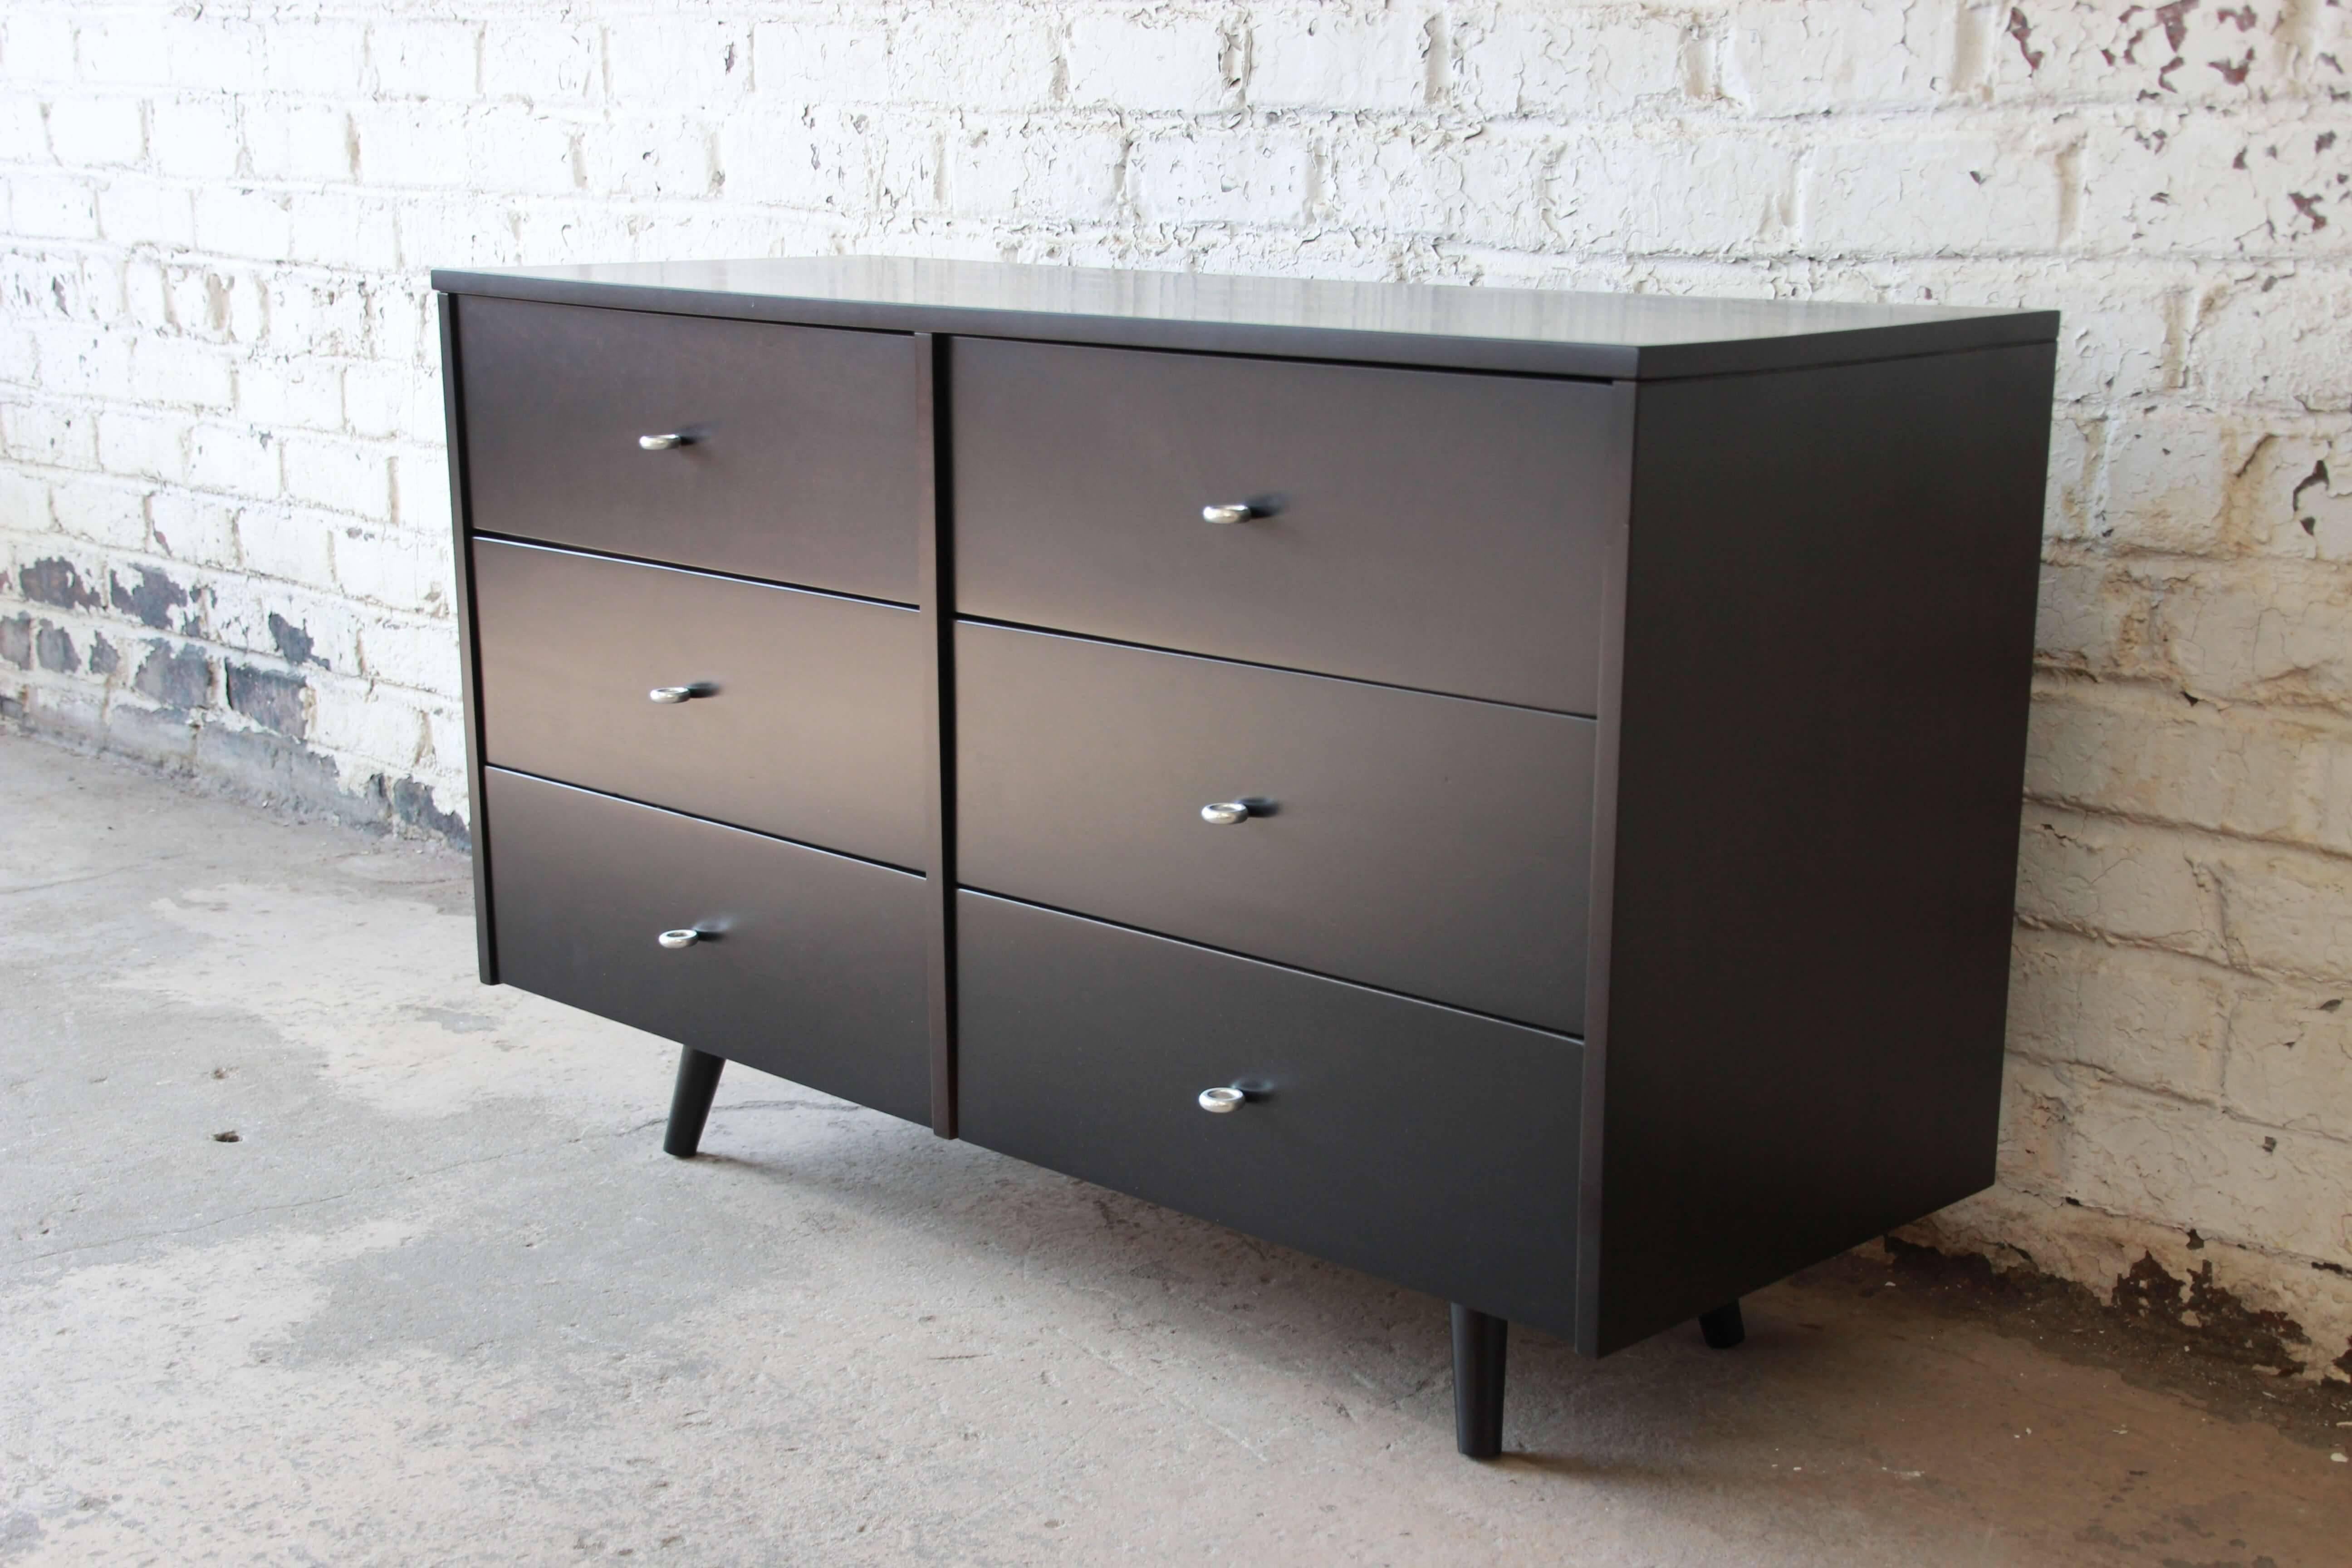 Offering a beautiful Mid-Century Modern ebonized six-drawer dresser designed by Paul McCobb for his iconic Planner Group line for Winchendon Furniture. The dresser features solid birch construction and original McCobb aluminum ring drawer pulls. The